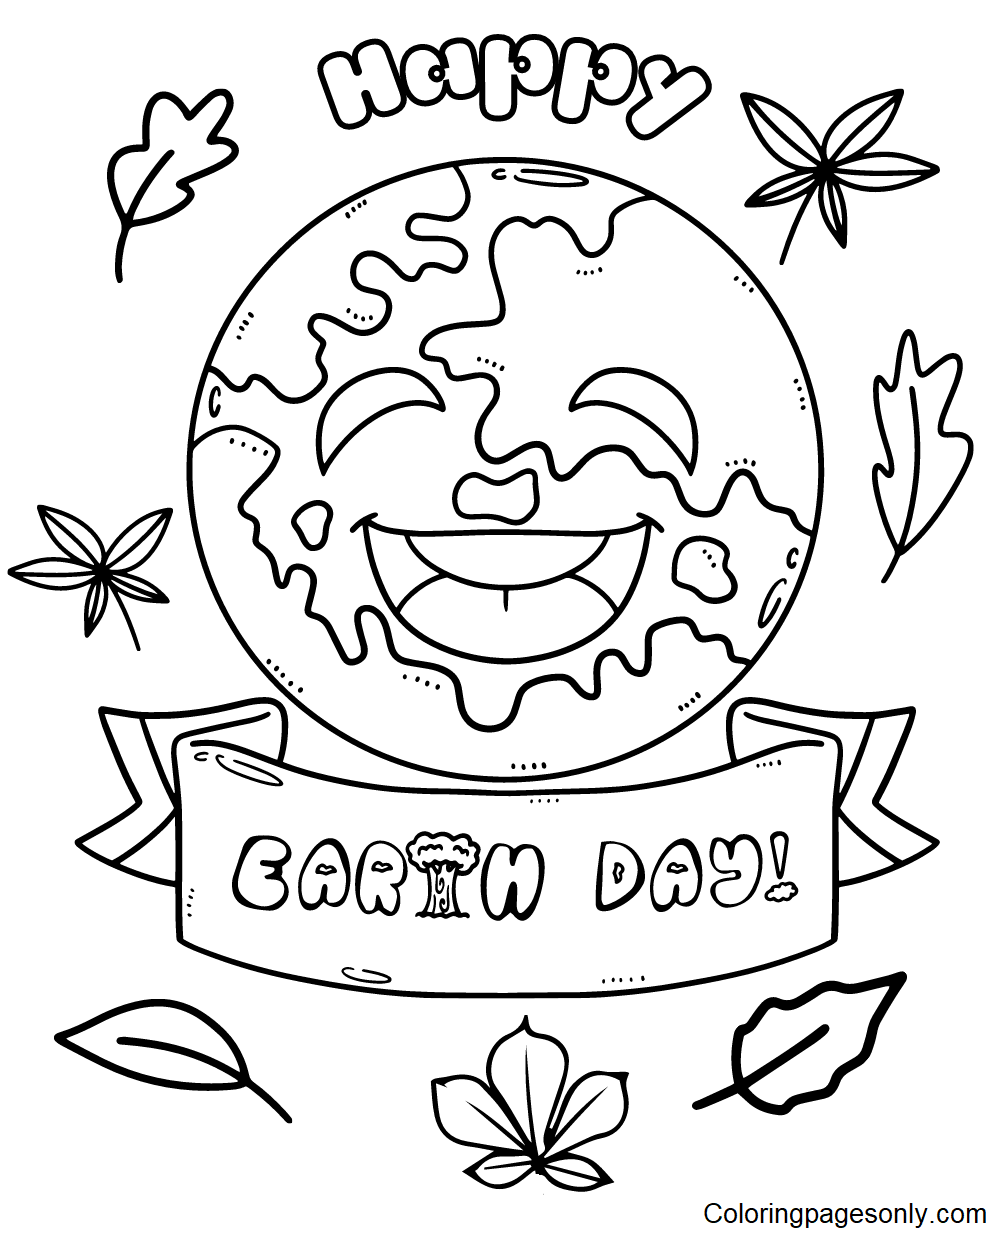 Happy Earth Day for Kids Coloring Pages